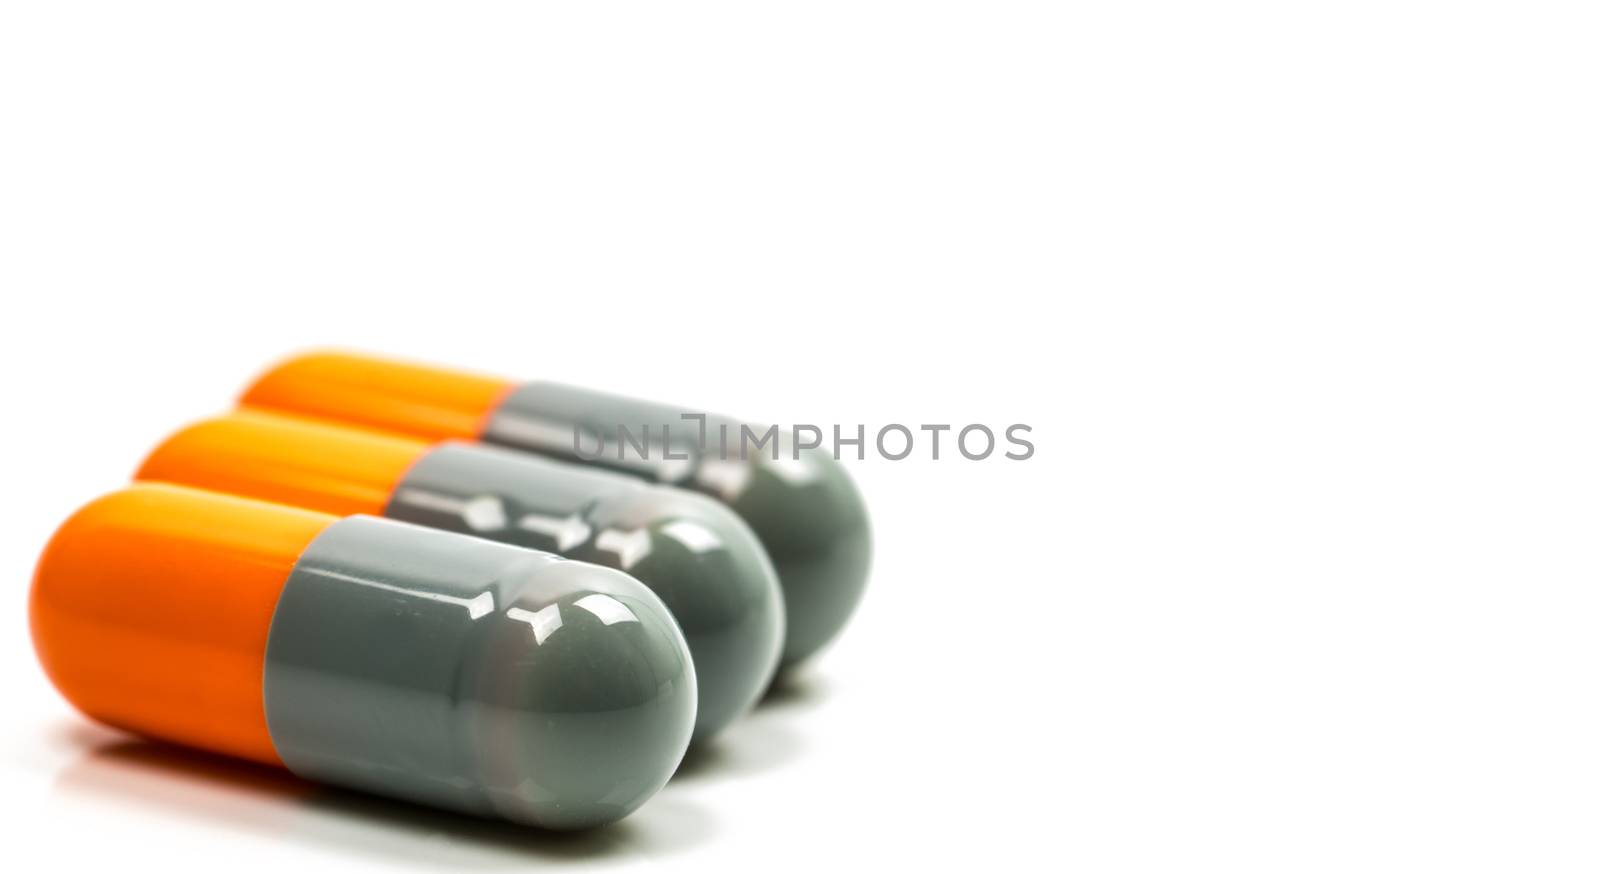 Selective focus of antibiotic capsules pills on blur background with copy space. Drug resistance concept. Antibiotics drug use with reasonable and global healthcare concept. Pharmaceutical industry. Pharmacy background.